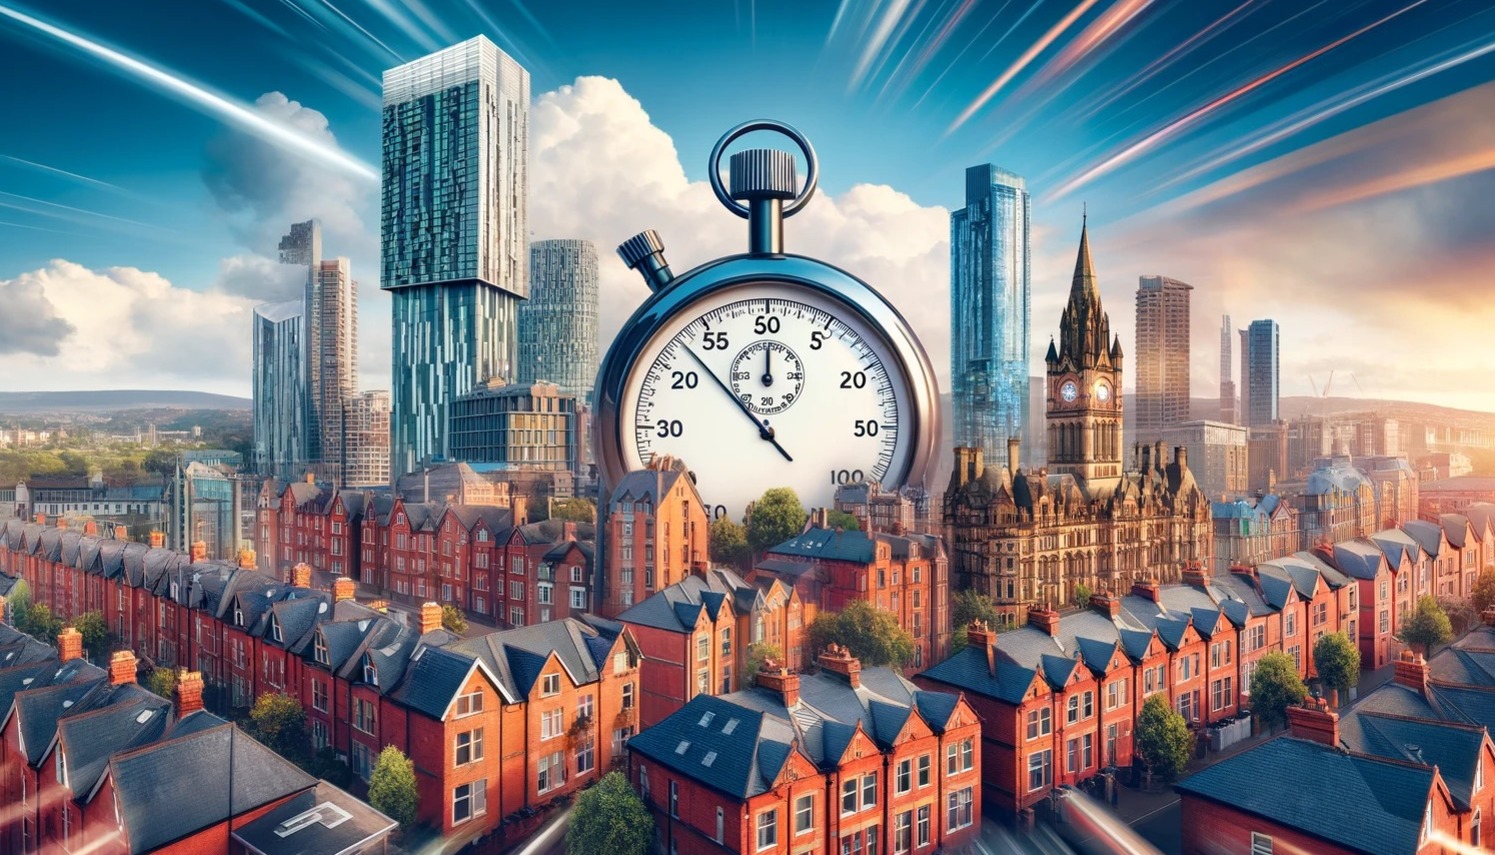 Houses and Manchester Landmarks with Stopwatch